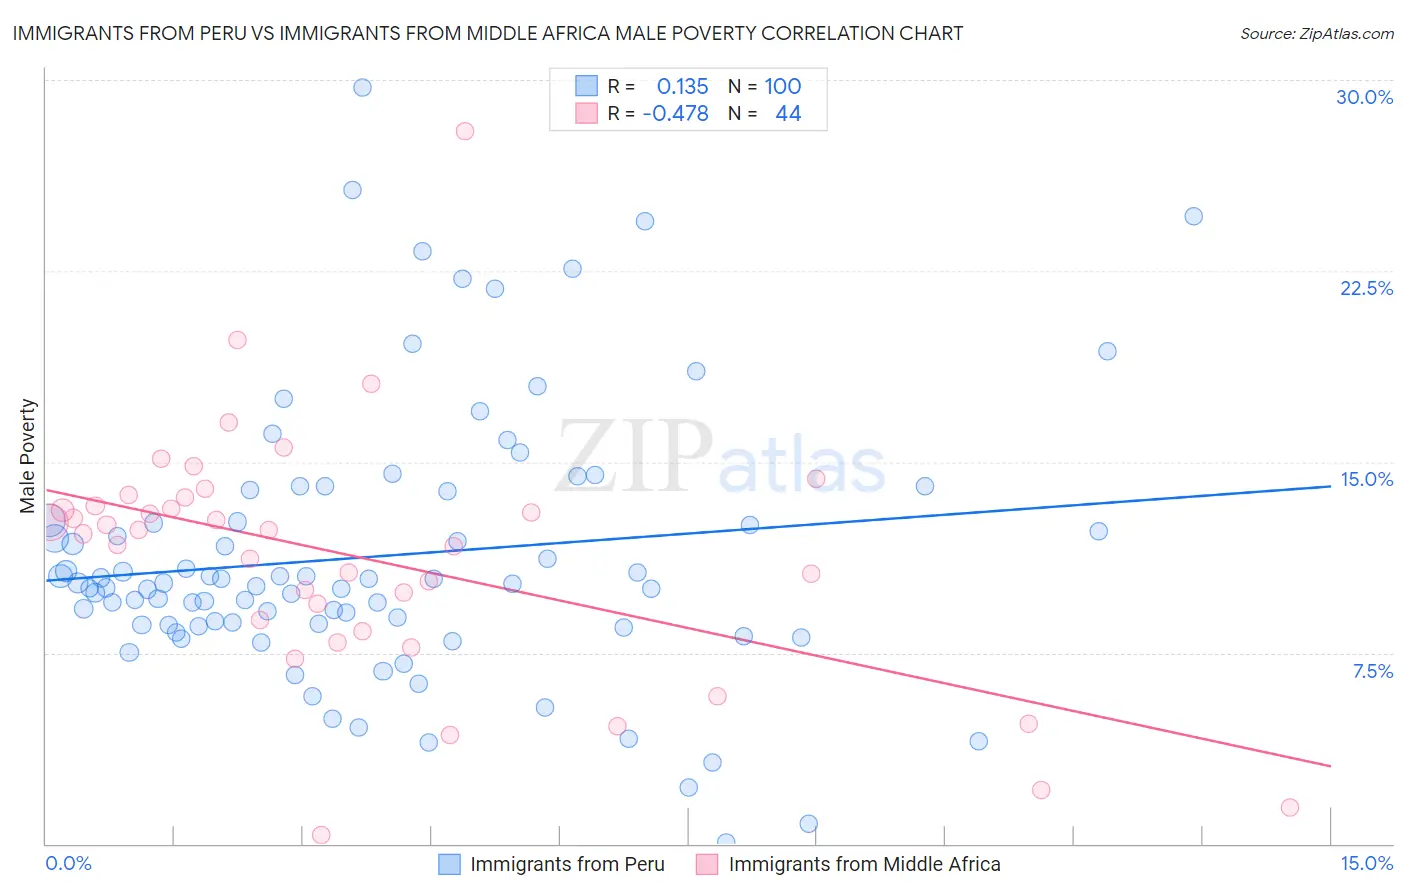 Immigrants from Peru vs Immigrants from Middle Africa Male Poverty